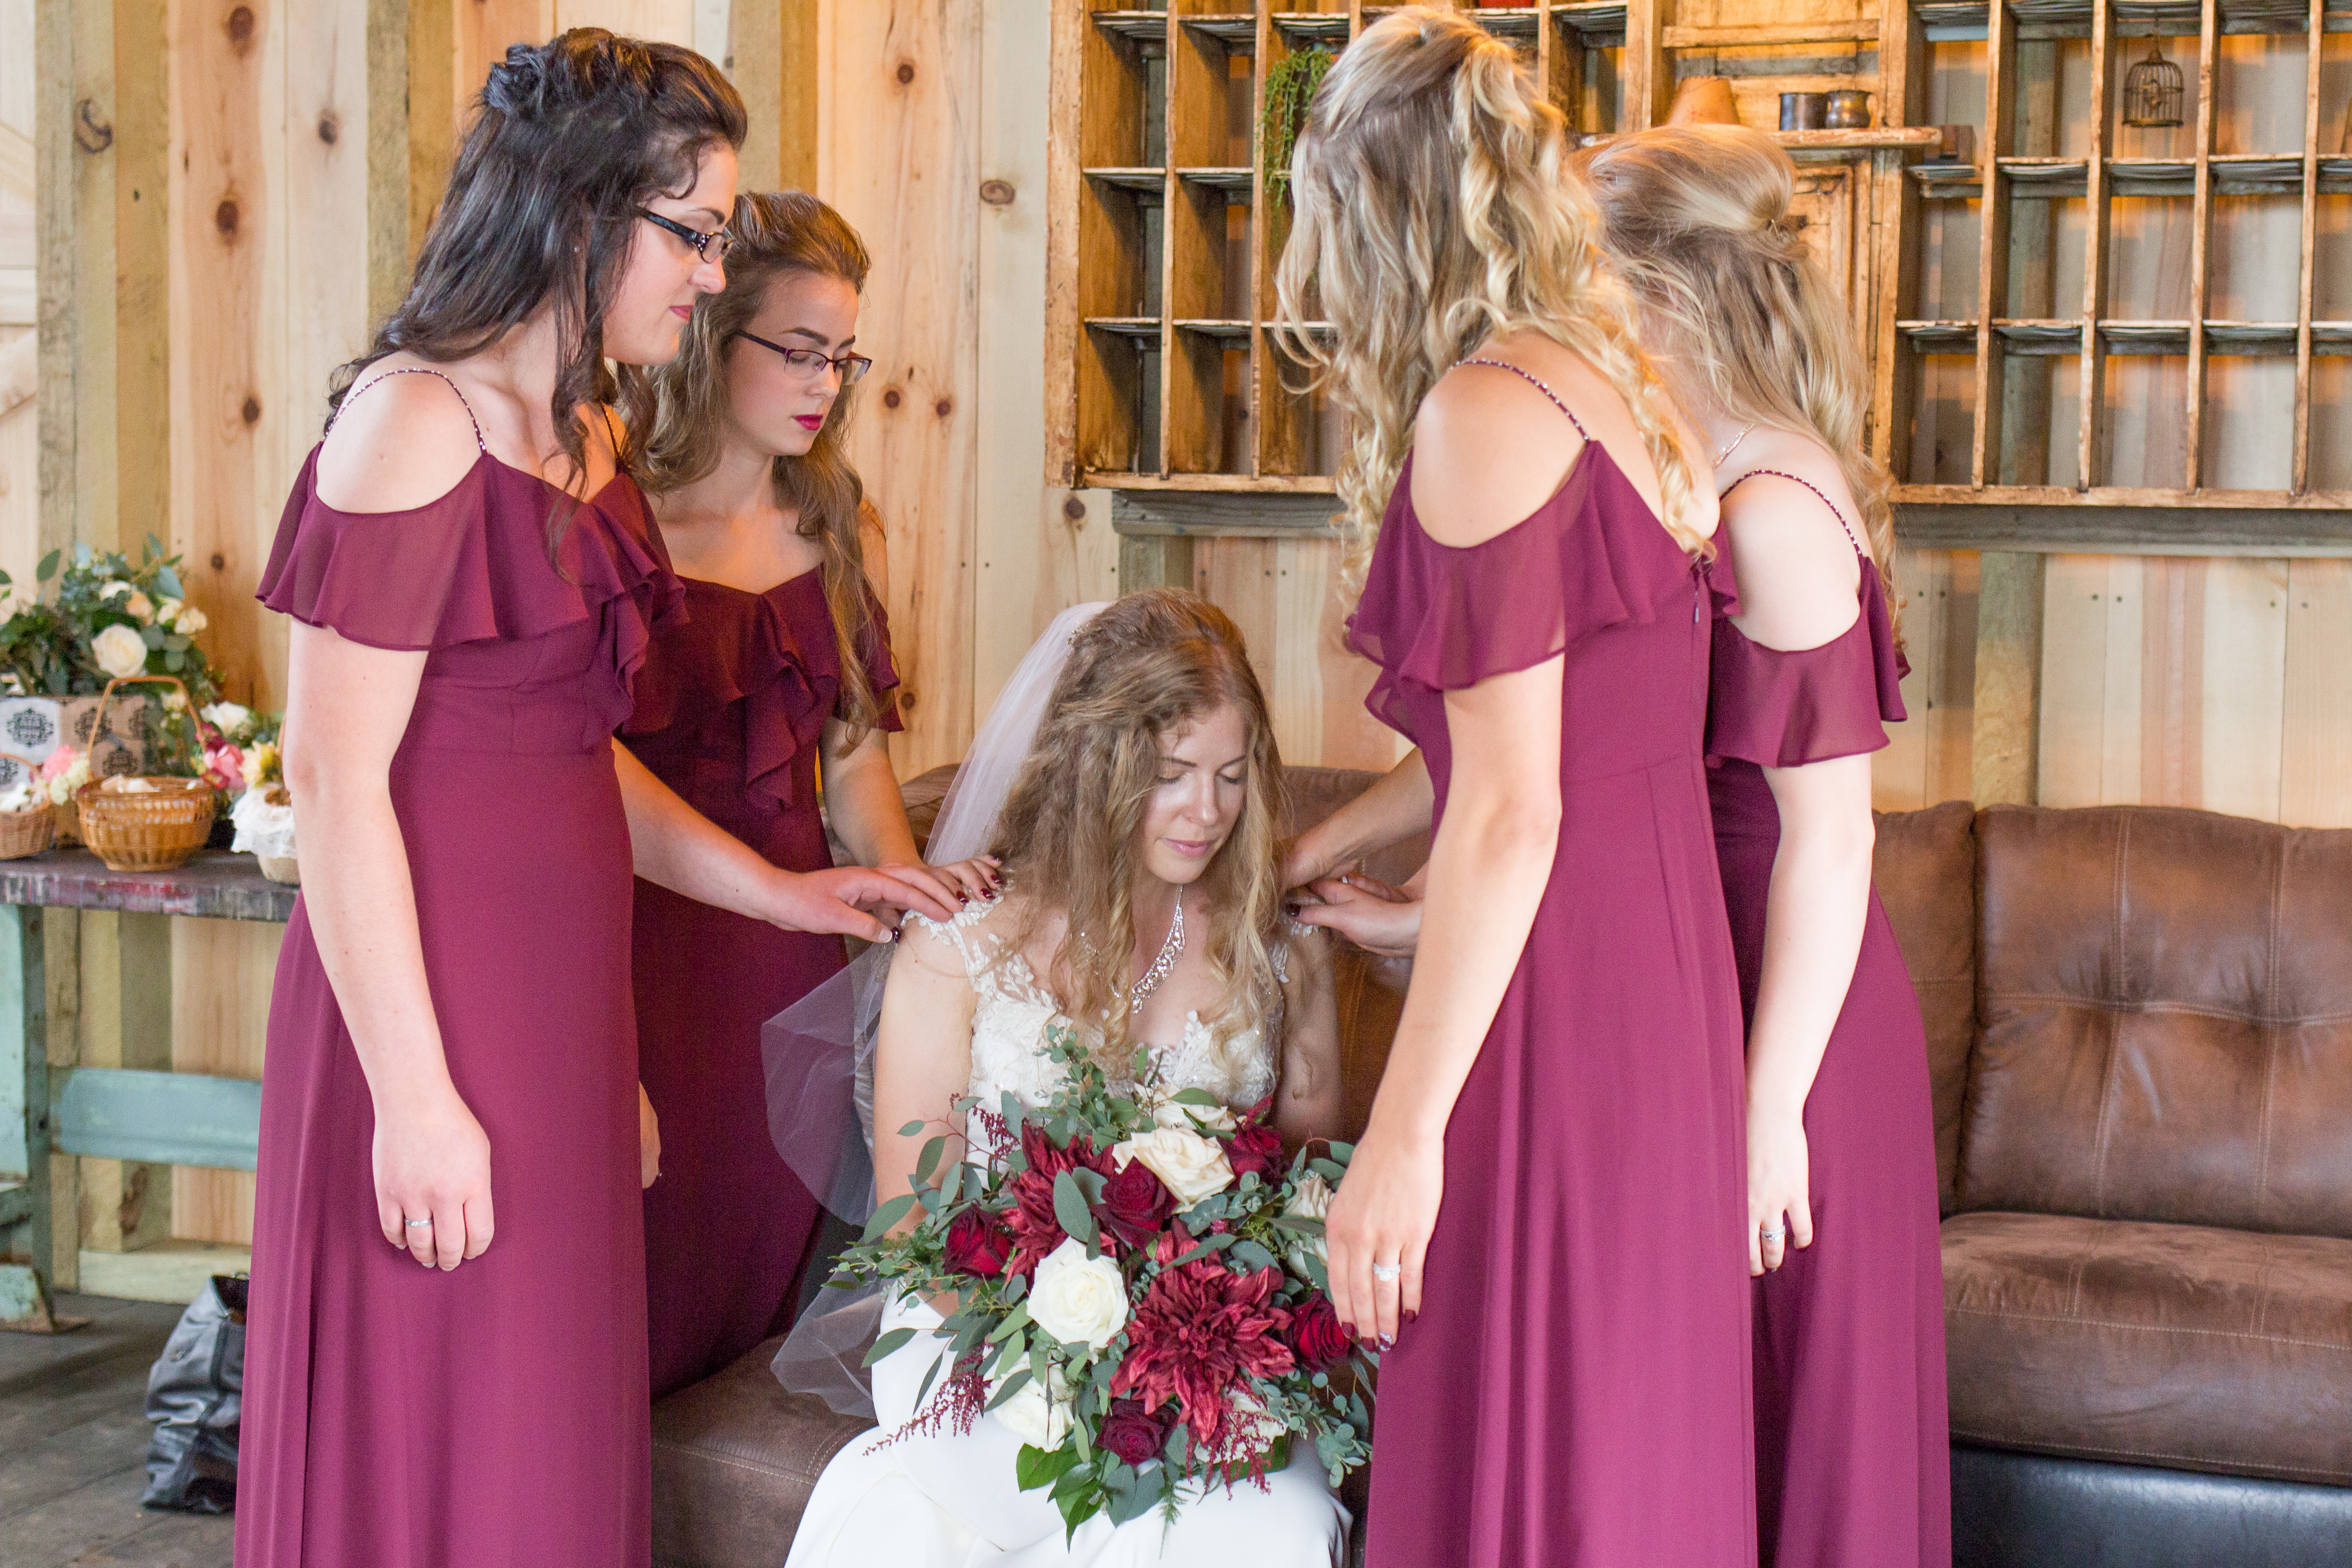 Bride and Bridesmaids at The Barn on Stoney Hill - Karen Elise Photography